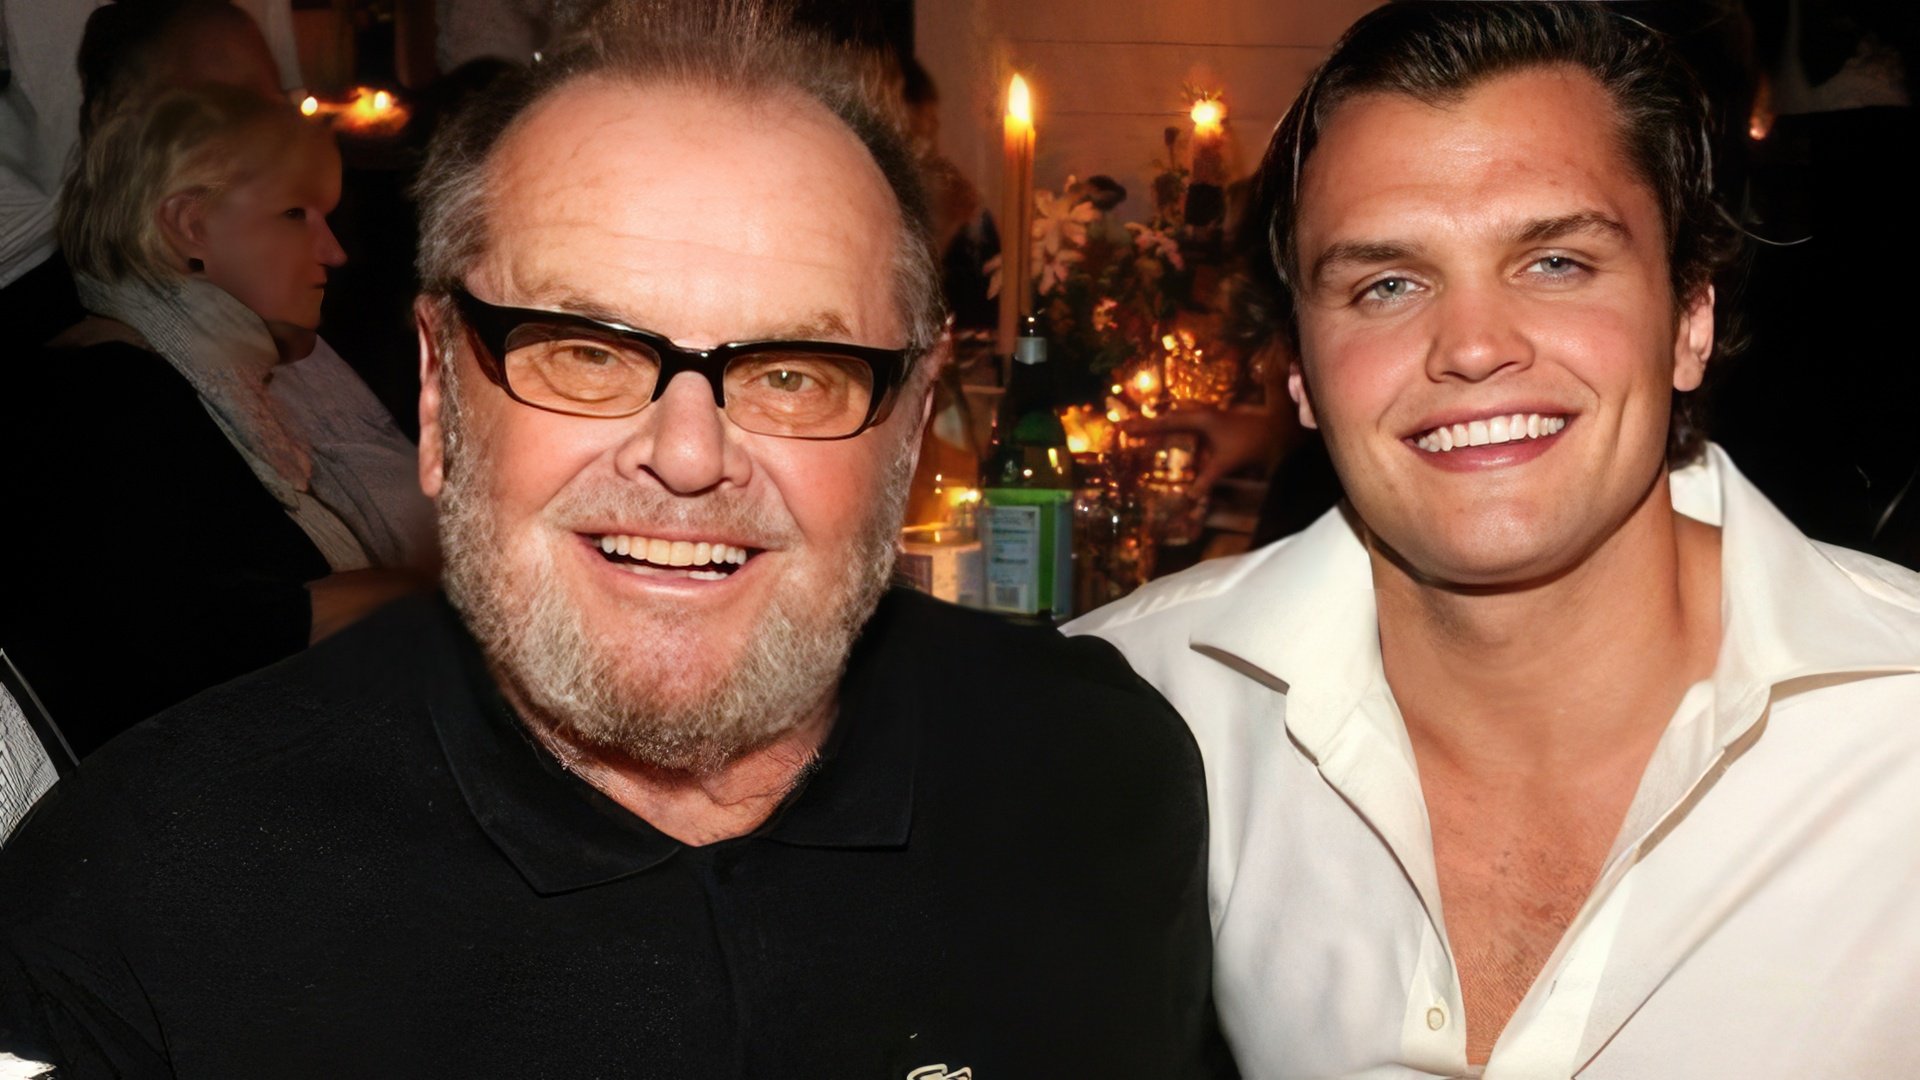 Jack Nicholson and his younger son Ray